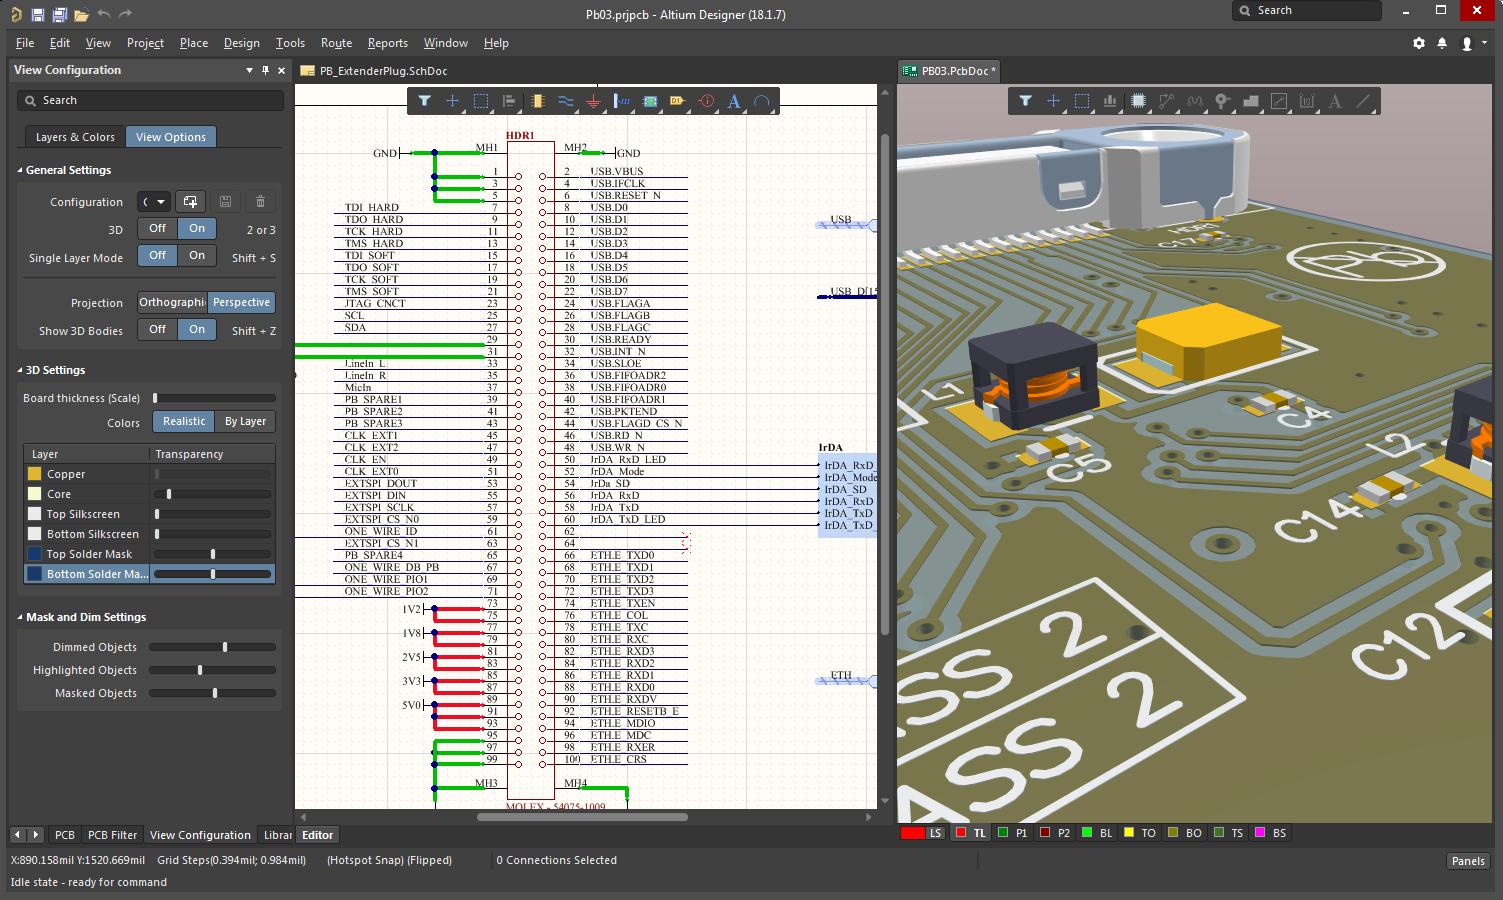 Screenshot of AD18 schematic and 3D layout in printed circuit board design software